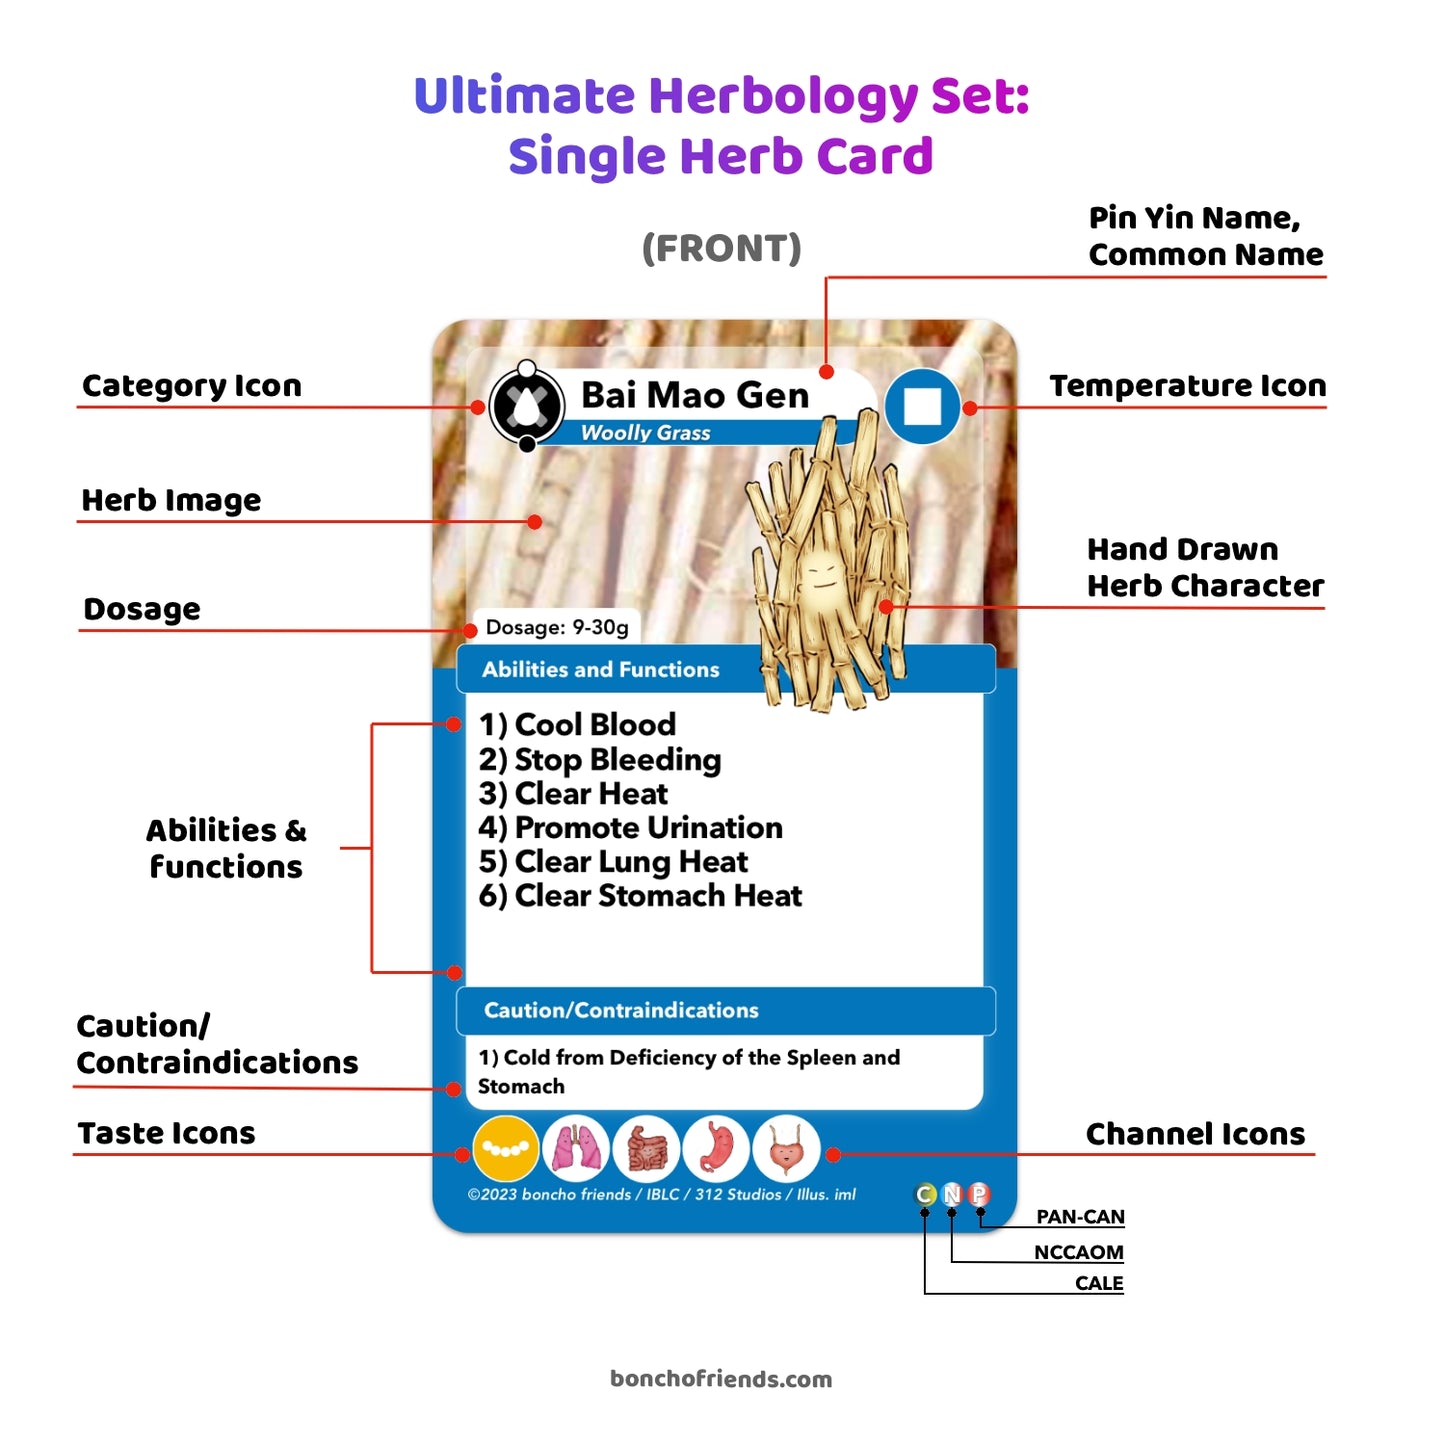 [PRE-ORDER] Ultimate Herbology Set (For CALE, NCCAOM, and PAN-CAN) - Regular Size or Plus Size